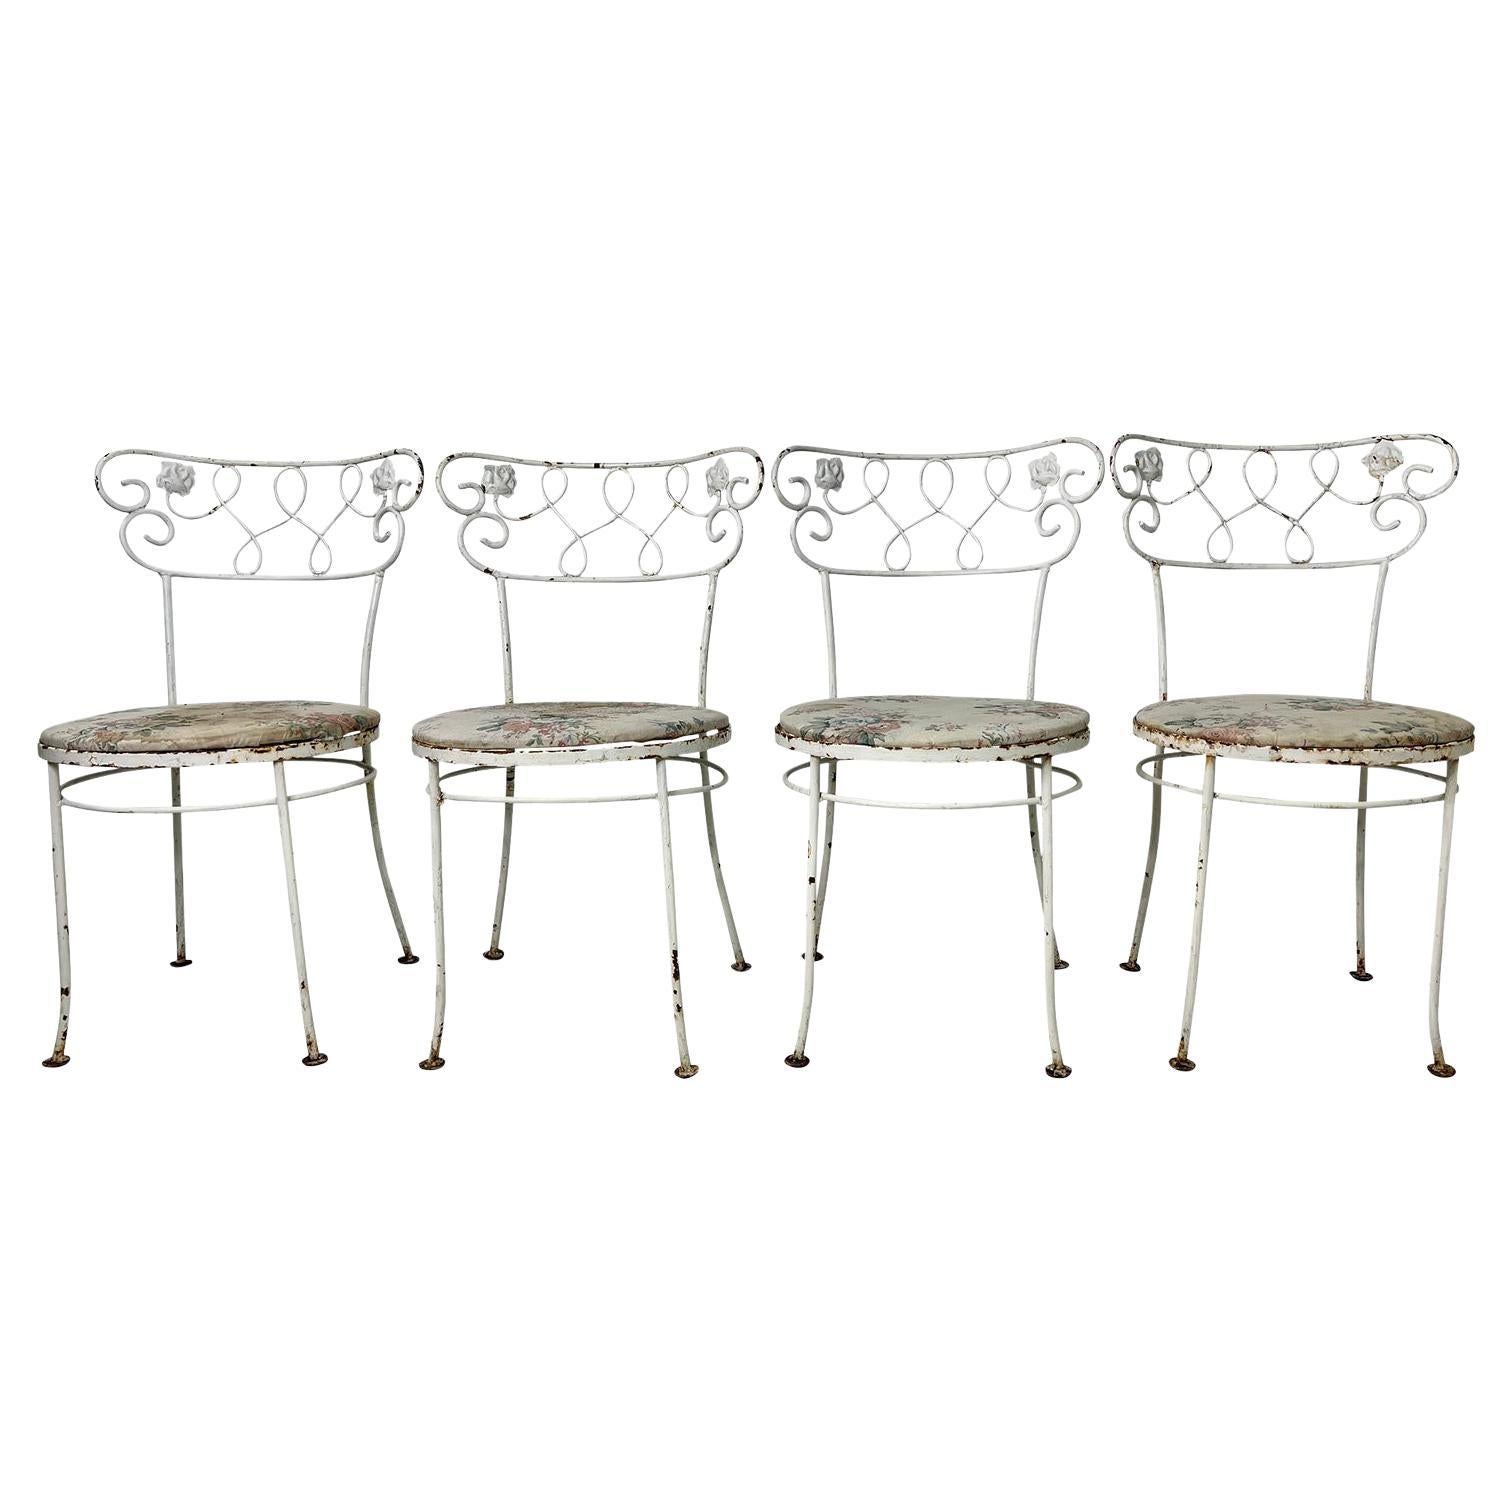 1960s Cast Iron Outdoor Chairs - Set of 4 For Sale